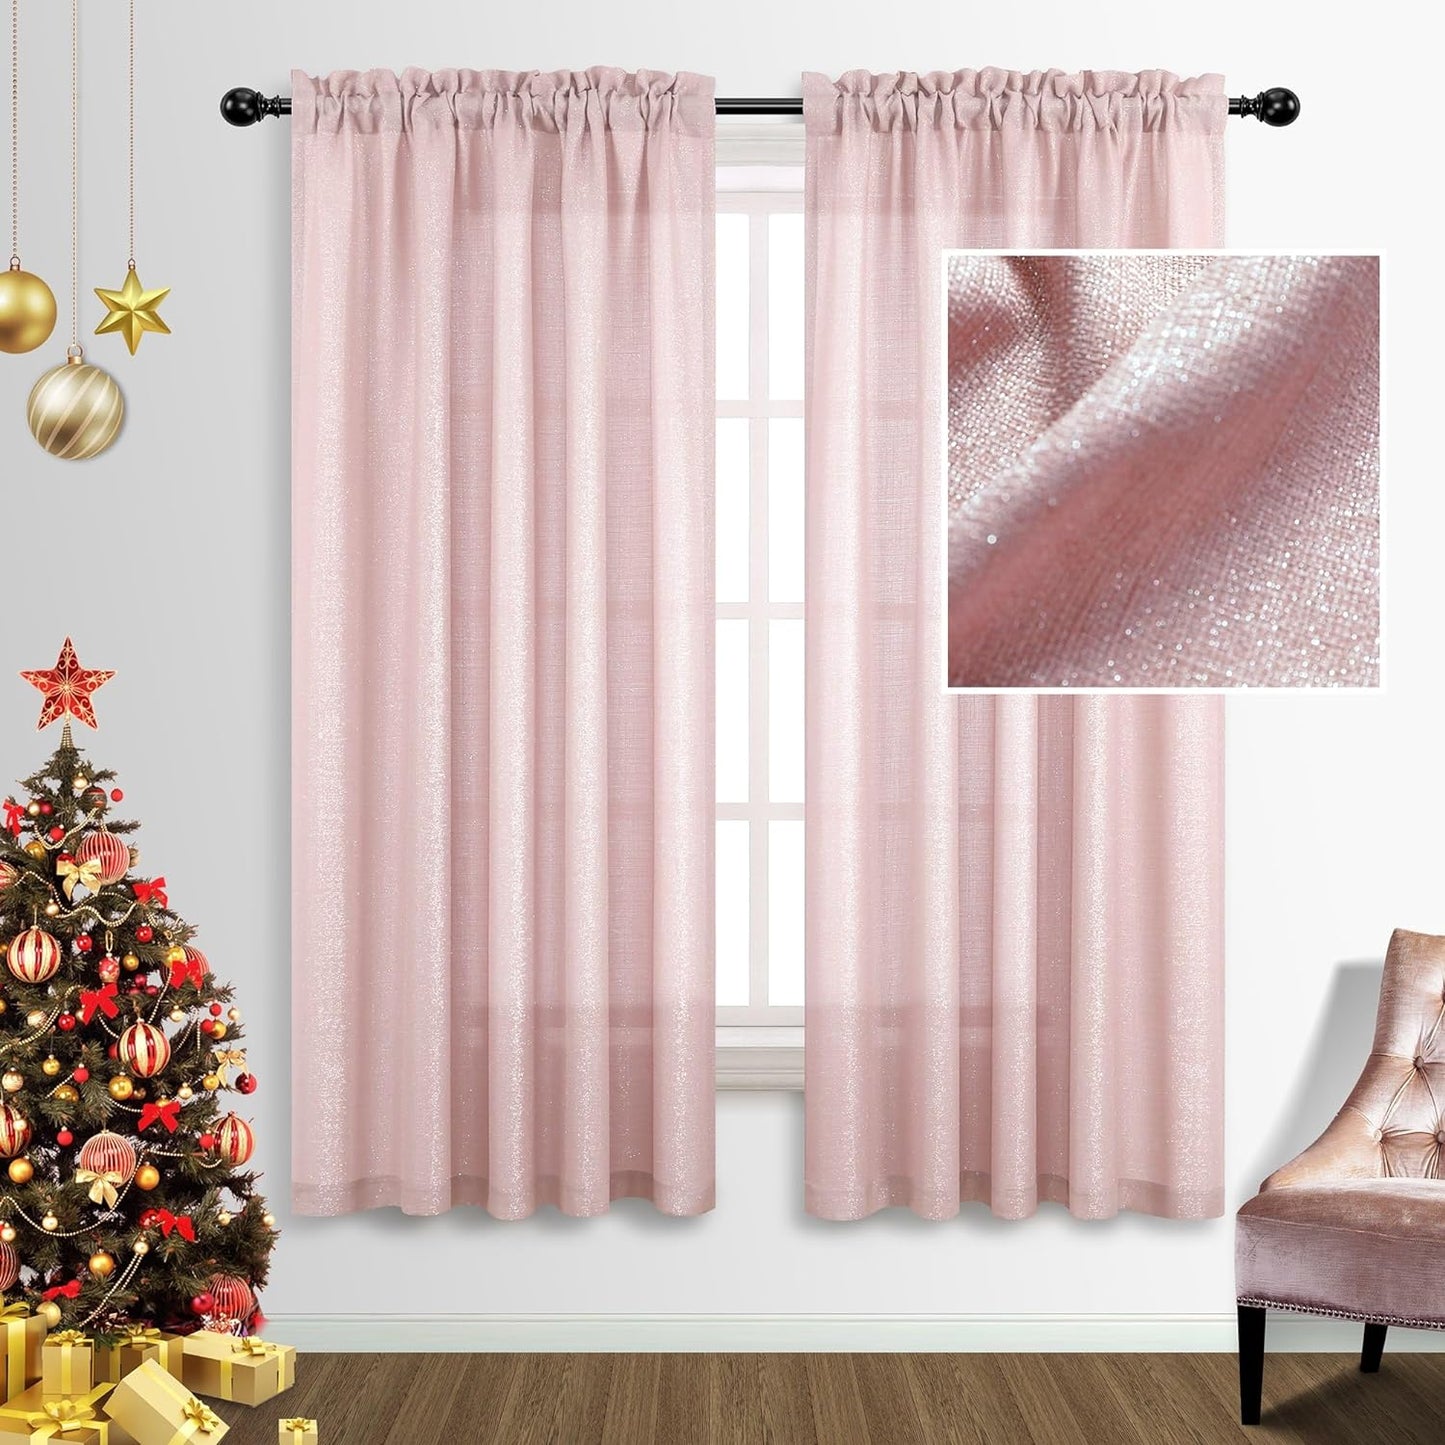 Gold Curtains 84 Inch Length for Living Room 2 Panels Set Rod Pocket Window Decor Semi Sheer Luxury Sparkle Shimmer Shiny Glitter Brown Golden Mustard Curtains for Bedroom 52X84 Long Christmas Decor  MRS.NATURALL TEXTILE Pink 52X63 